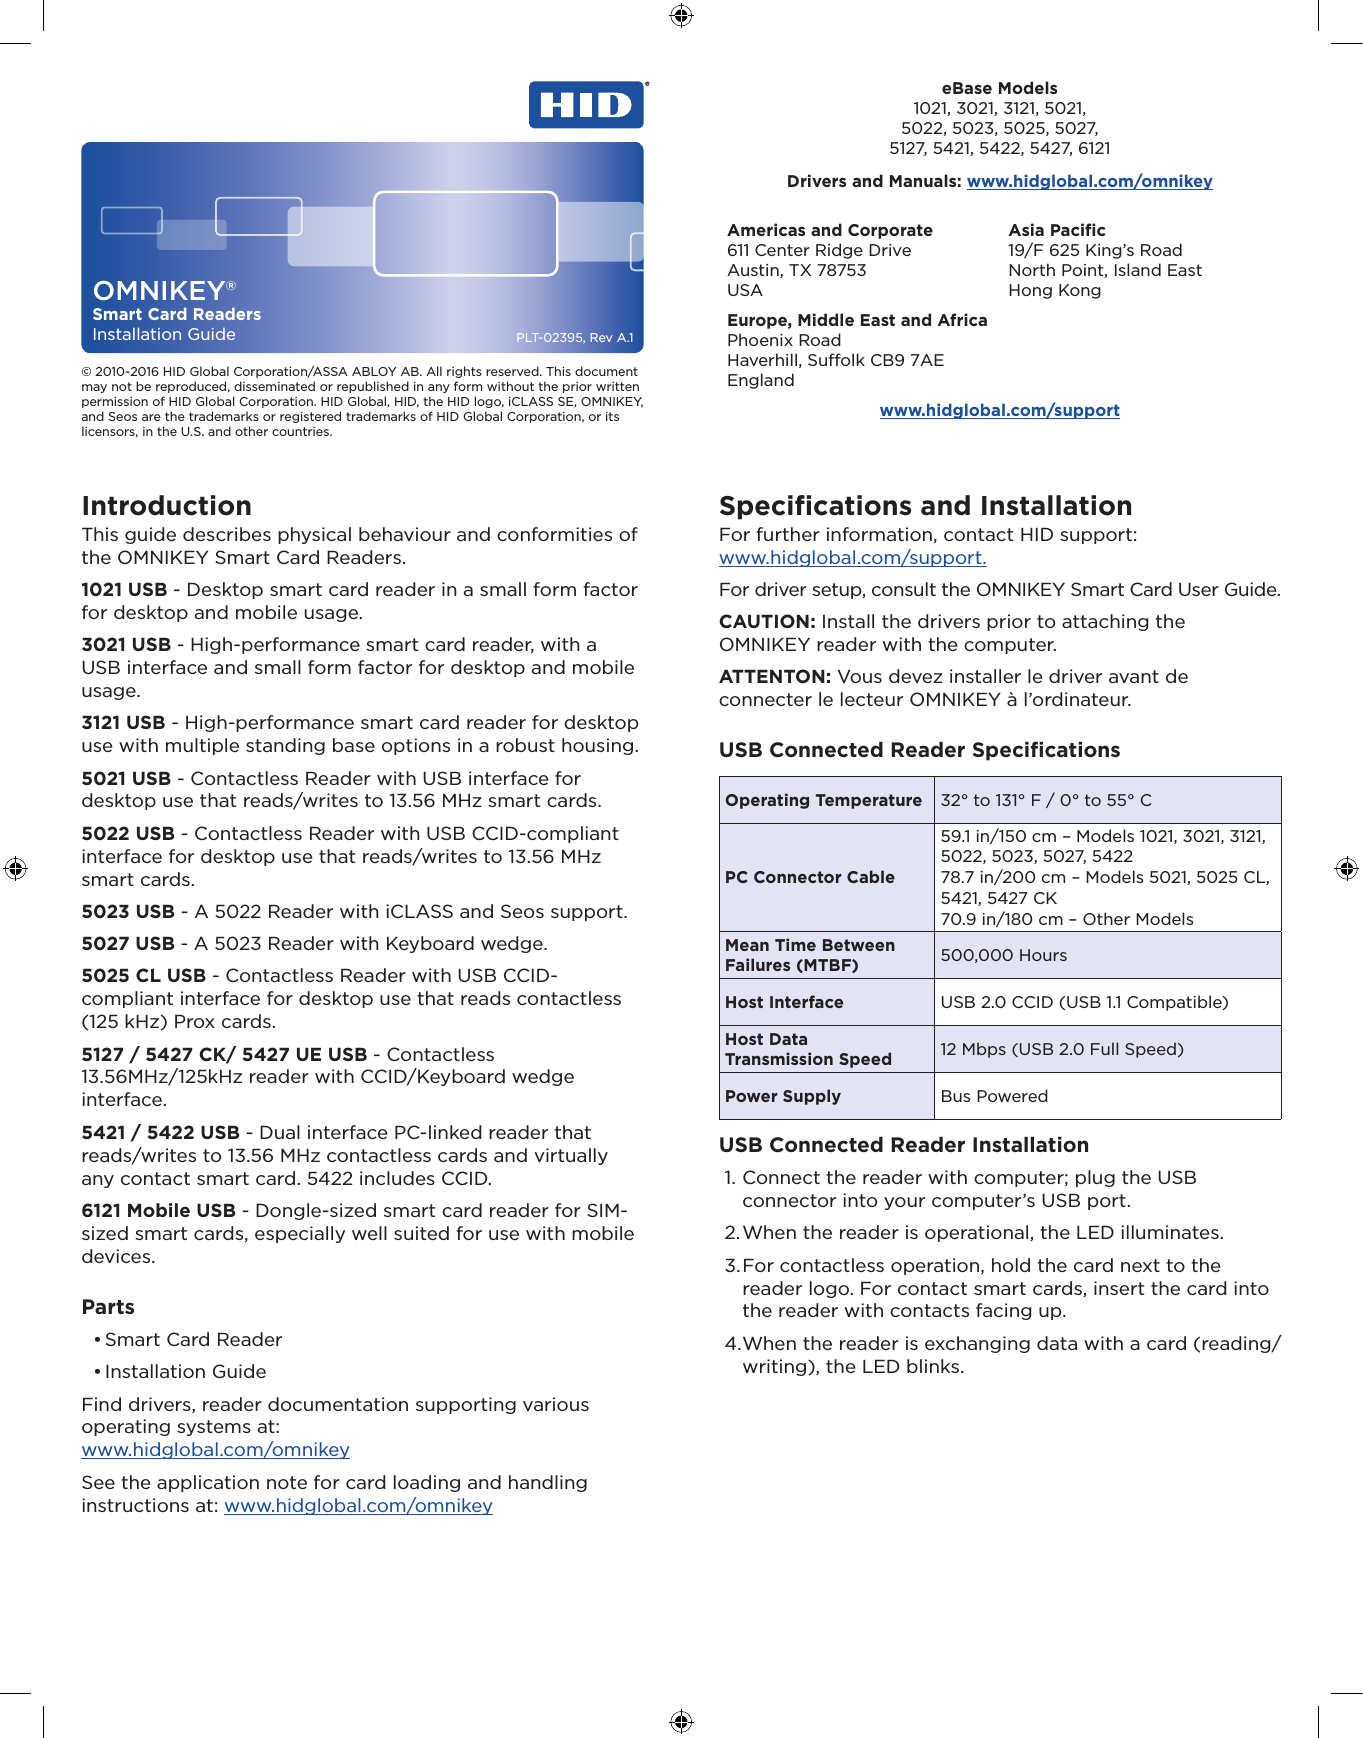  PLT-02395, Rev A.1OMNIKEY®Smart Card ReadersInstallation Guide© 2010-2016 HID Global Corporation/ASSA ABLOY AB. All rights reserved. This document may not be reproduced, disseminated or republished in any form without the prior written permission of HID Global Corporation. HID Global, HID, the HID logo, iCLASS SE, OMNIKEY, and Seos are the trademarks or registered trademarks of HID Global Corporation, or its licensors, in the U.S. and other countries.Americas and Corporate611 Center Ridge DriveAustin, TX 78753USAAsia Paciﬁc19/F 625 King’s RoadNorth Point, Island EastHong KongEurope, Middle East and AfricaPhoenix RoadHaverhill, Suolk CB9 7AEEnglandwww.hidglobal.com/supporteBase Models1021, 3021, 3121, 5021,5022, 5023, 5025, 5027,5127, 5421, 5422, 5427, 6121Drivers and Manuals: www.hidglobal.com/omnikeyIntroductionThis guide describes physical behaviour and conformities of the OMNIKEY Smart Card Readers.1021 USB - Desktop smart card reader in a small form factor for desktop and mobile usage.3021 USB - High-performance smart card reader, with a USB interface and small form factor for desktop and mobile usage.3121 USB - High-performance smart card reader for desktop use with multiple standing base options in a robust housing.5021 USB - Contactless Reader with USB interface for desktop use that reads/writes to 13.56 MHz smart cards.5022 USB - Contactless Reader with USB CCID-compliant interface for desktop use that reads/writes to 13.56 MHz smart cards.5023 USB - A 5022 Reader with iCLASS and Seos support.5027 USB - A 5023 Reader with Keyboard wedge.5025 CL USB - Contactless Reader with USB CCID-compliant interface for desktop use that reads contactless (125 kHz) Prox cards.5127 / 5427 CK/ 5427 UE USB - Contactless 13.56MHz/125kHz reader with CCID/Keyboard wedge interface.5421 / 5422 USB - Dual interface PC-linked reader that reads/writes to 13.56 MHz contactless cards and virtually any contact smart card. 5422 includes CCID.6121 Mobile USB - Dongle-sized smart card reader for SIM-sized smart cards, especially well suited for use with mobile devices.Parts• Smart Card Reader• Installation GuideFind drivers, reader documentation supporting various operating systems at:  www.hidglobal.com/omnikeySee the application note for card loading and handling instructions at: www.hidglobal.com/omnikeySpeciﬁcations and InstallationFor further information, contact HID support:  www.hidglobal.com/support.For driver setup, consult the OMNIKEY Smart Card User Guide.CAUTION: Install the drivers prior to attaching the OMNIKEY reader with the computer.ATTENTON: Vous devez installer le driver avant de connecter le lecteur OMNIKEY à l’ordinateur.USB Connected Reader SpeciﬁcationsOperating Temperature 32° to 131° F / 0° to 55° C PC Connector Cable59.1 in/150 cm – Models 1021, 3021, 3121, 5022, 5023, 5027, 542278.7 in/200 cm – Models 5021, 5025 CL, 5421, 5427 CK70.9 in/180 cm – Other ModelsMean Time Between Failures (MTBF) 500,000 HoursHost Interface USB 2.0 CCID (USB 1.1 Compatible)Host Data  Transmission Speed 12 Mbps (USB 2.0 Full Speed)Power Supply Bus PoweredUSB Connected Reader Installation1. Connect the reader with computer; plug the USB connector into your computer’s USB port.2. When the reader is operational, the LED illuminates.3. For contactless operation, hold the card next to the reader logo. For contact smart cards, insert the card into the reader with contacts facing up.4. When the reader is exchanging data with a card (reading/writing), the LED blinks.